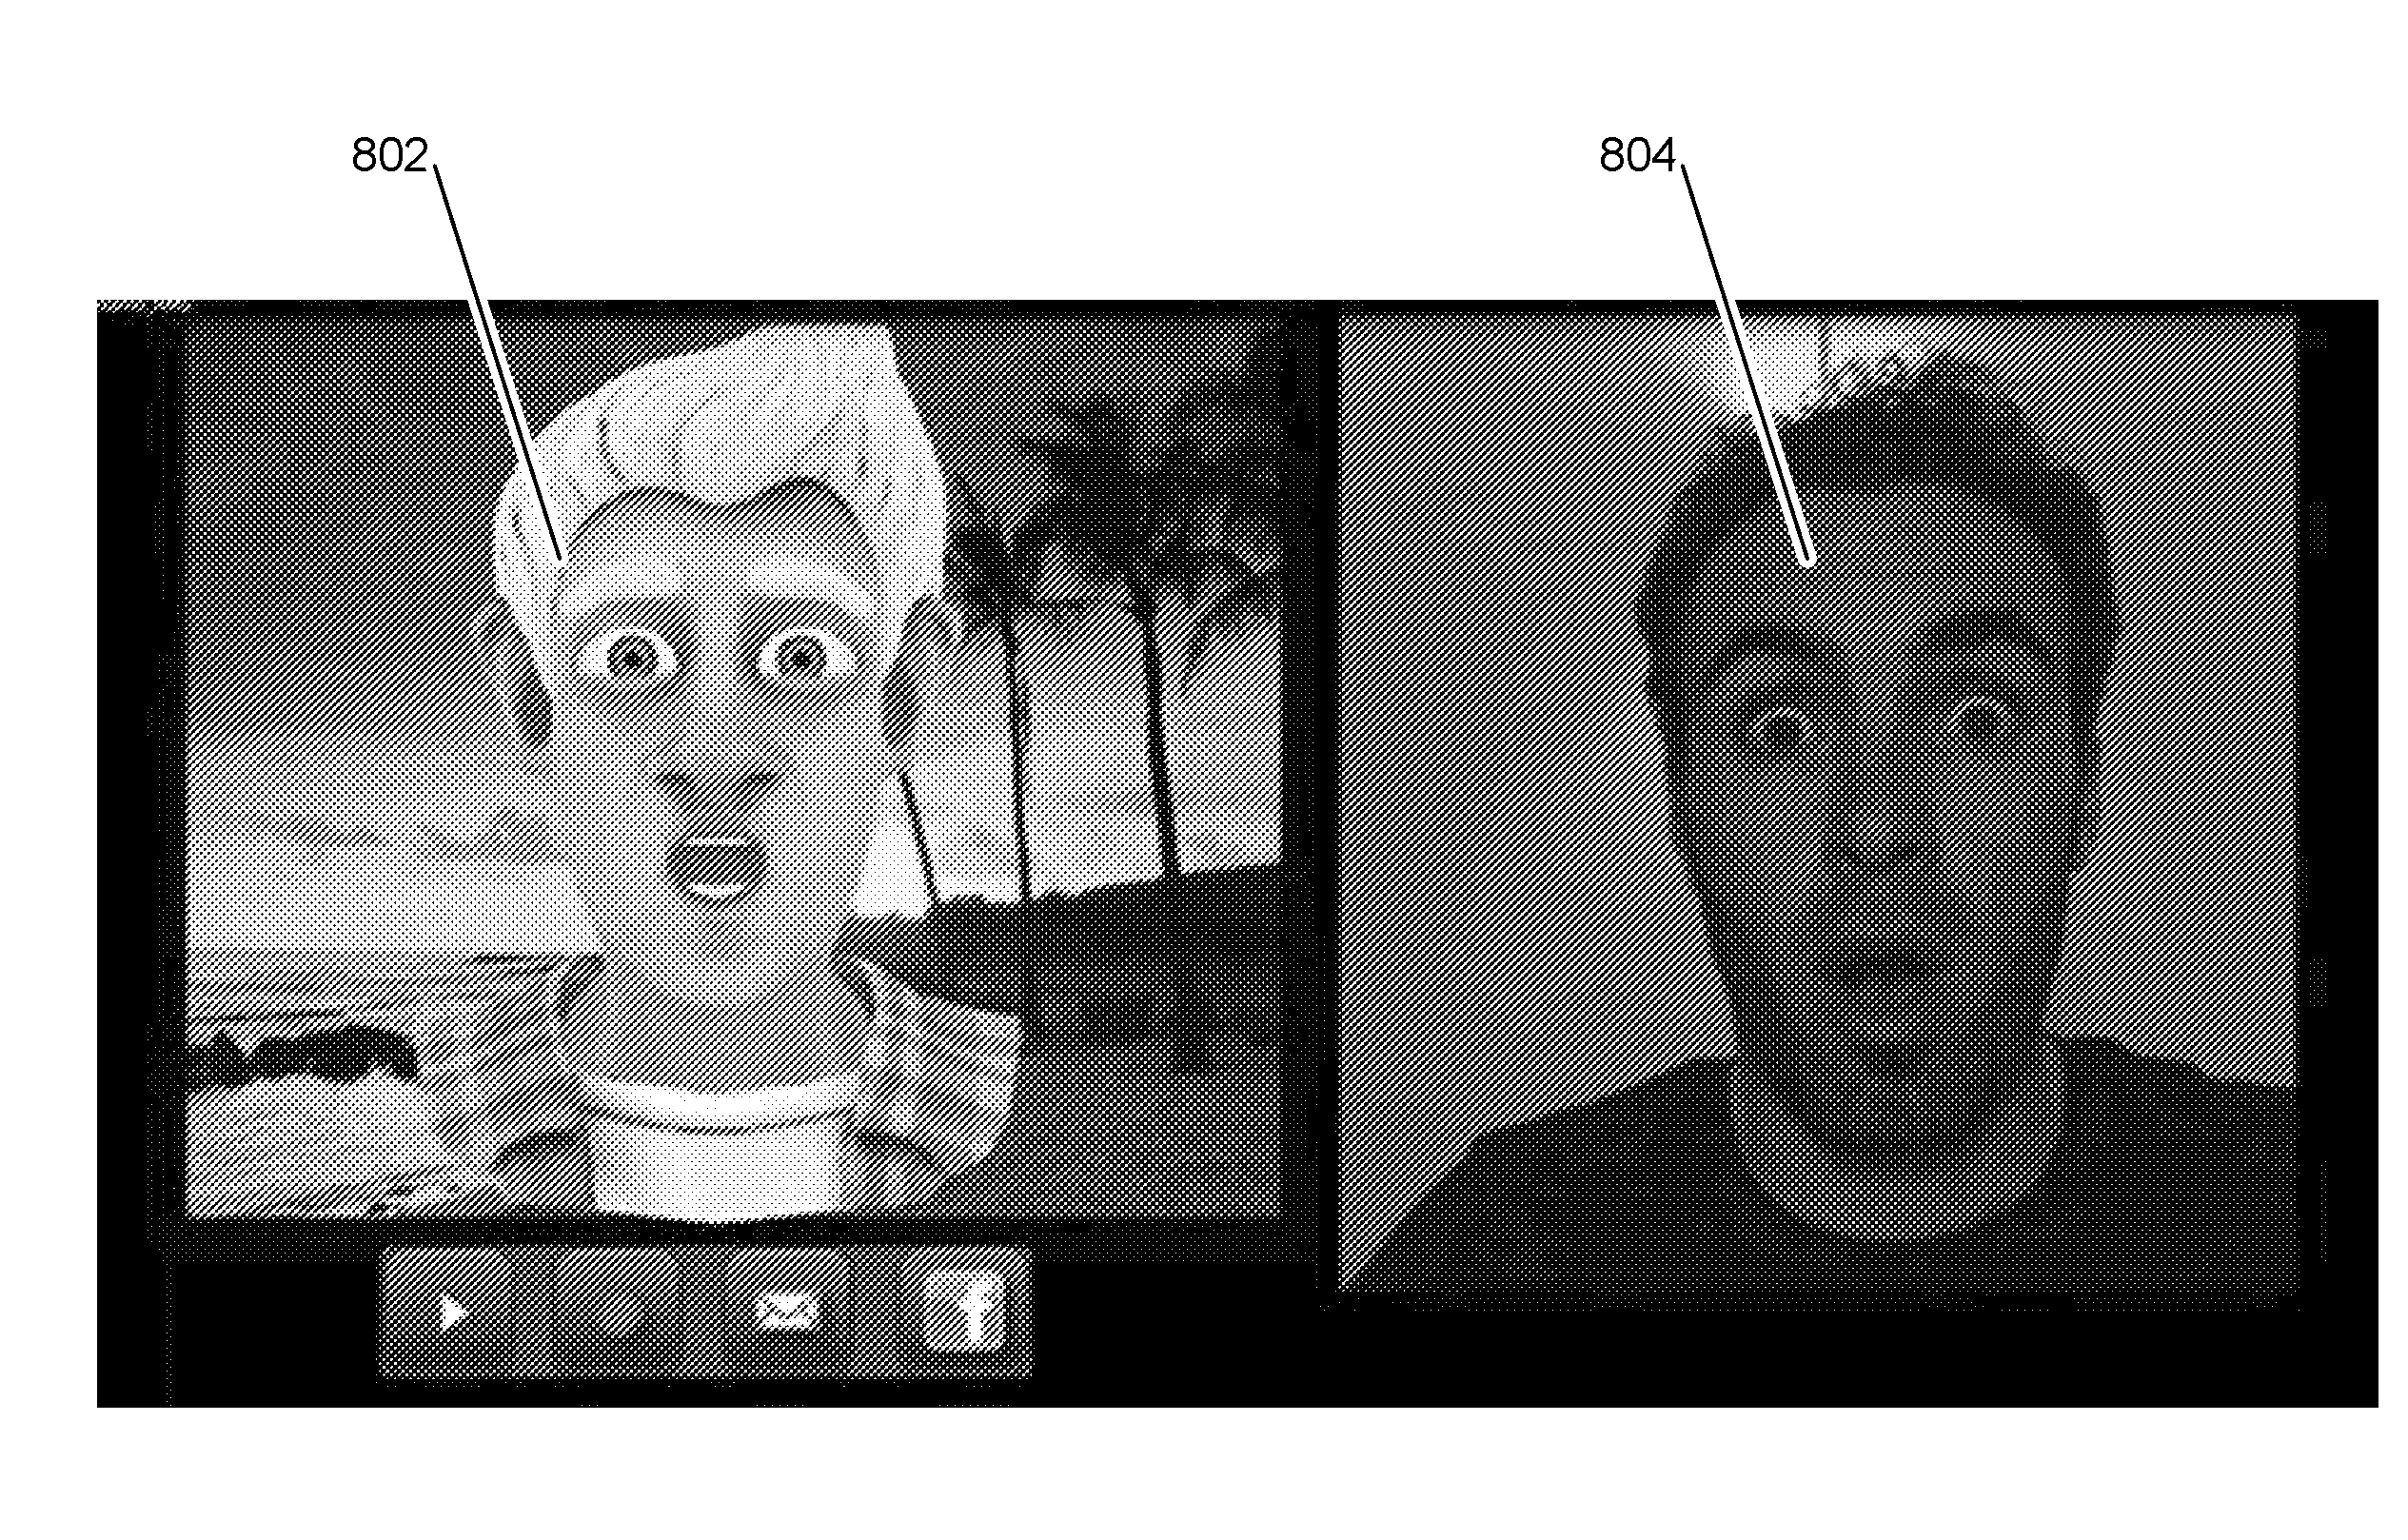 Systems and methods for creating and distributing modifiable animated video messages